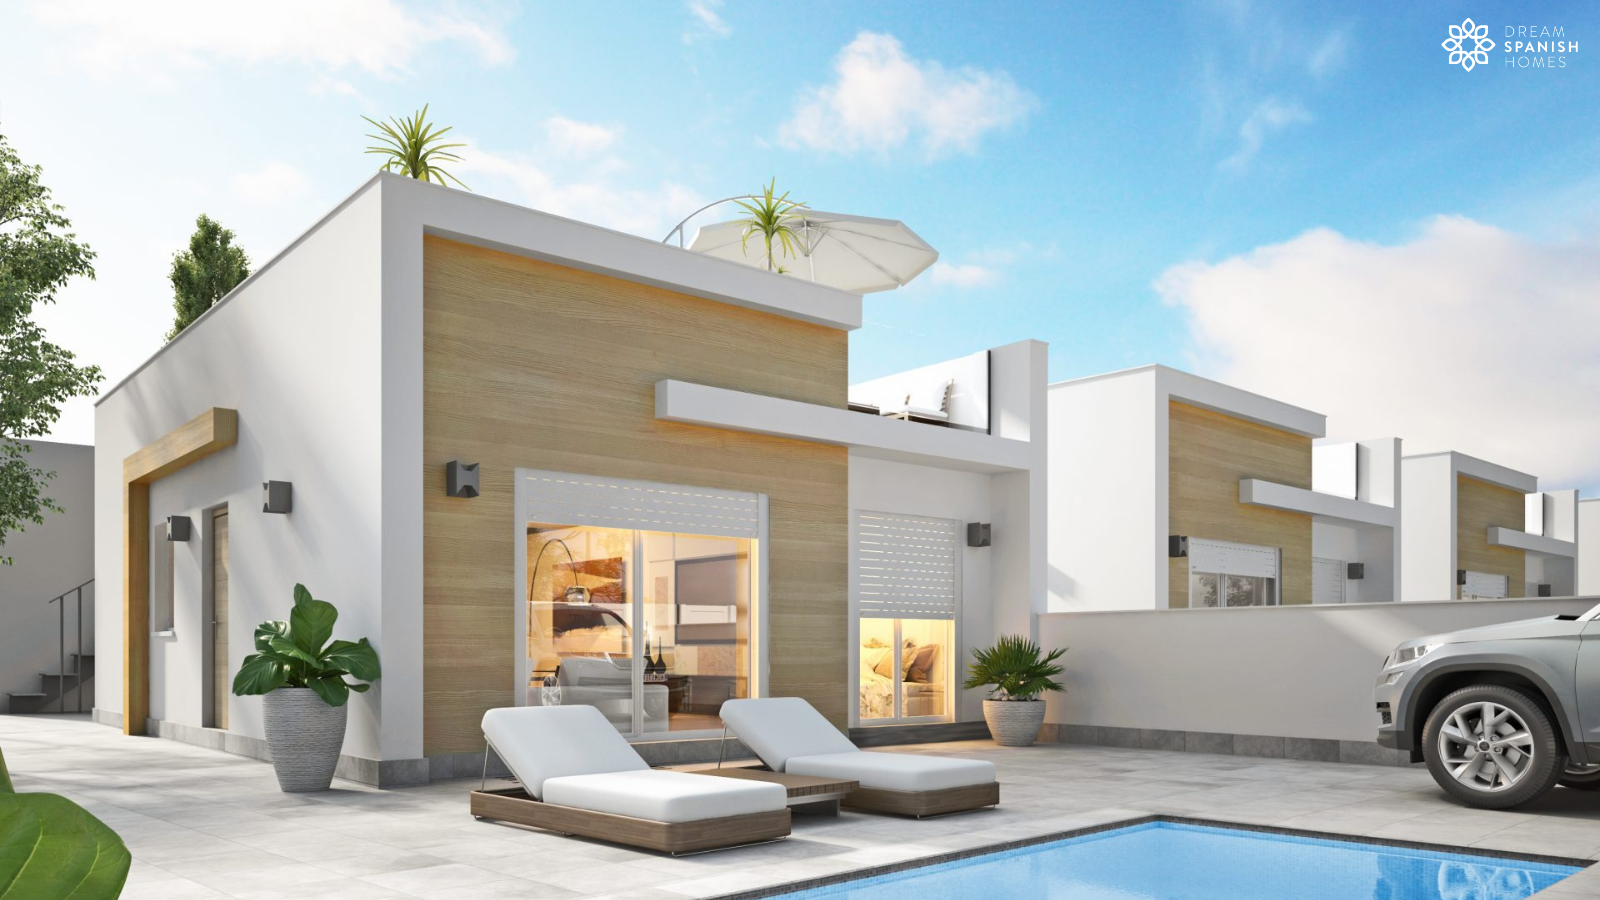 3 Bedroom Villa with Private Pool in Avileses Phase 1